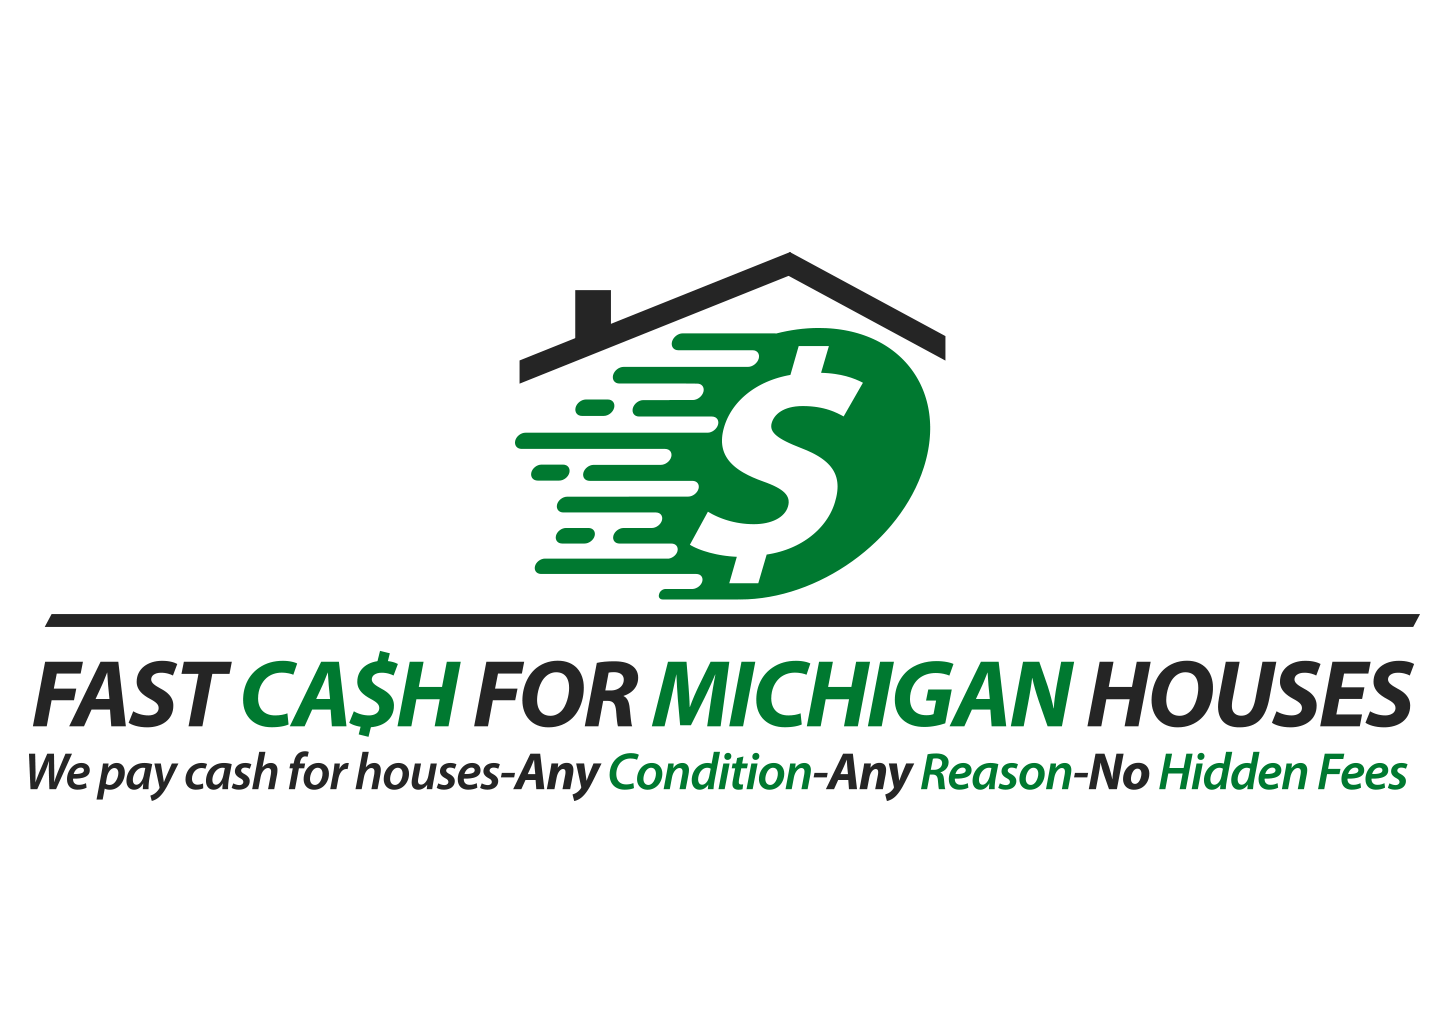 Fast Cash Logo - Get A Cash Offer Today | Fast Cash for Michigan Houses